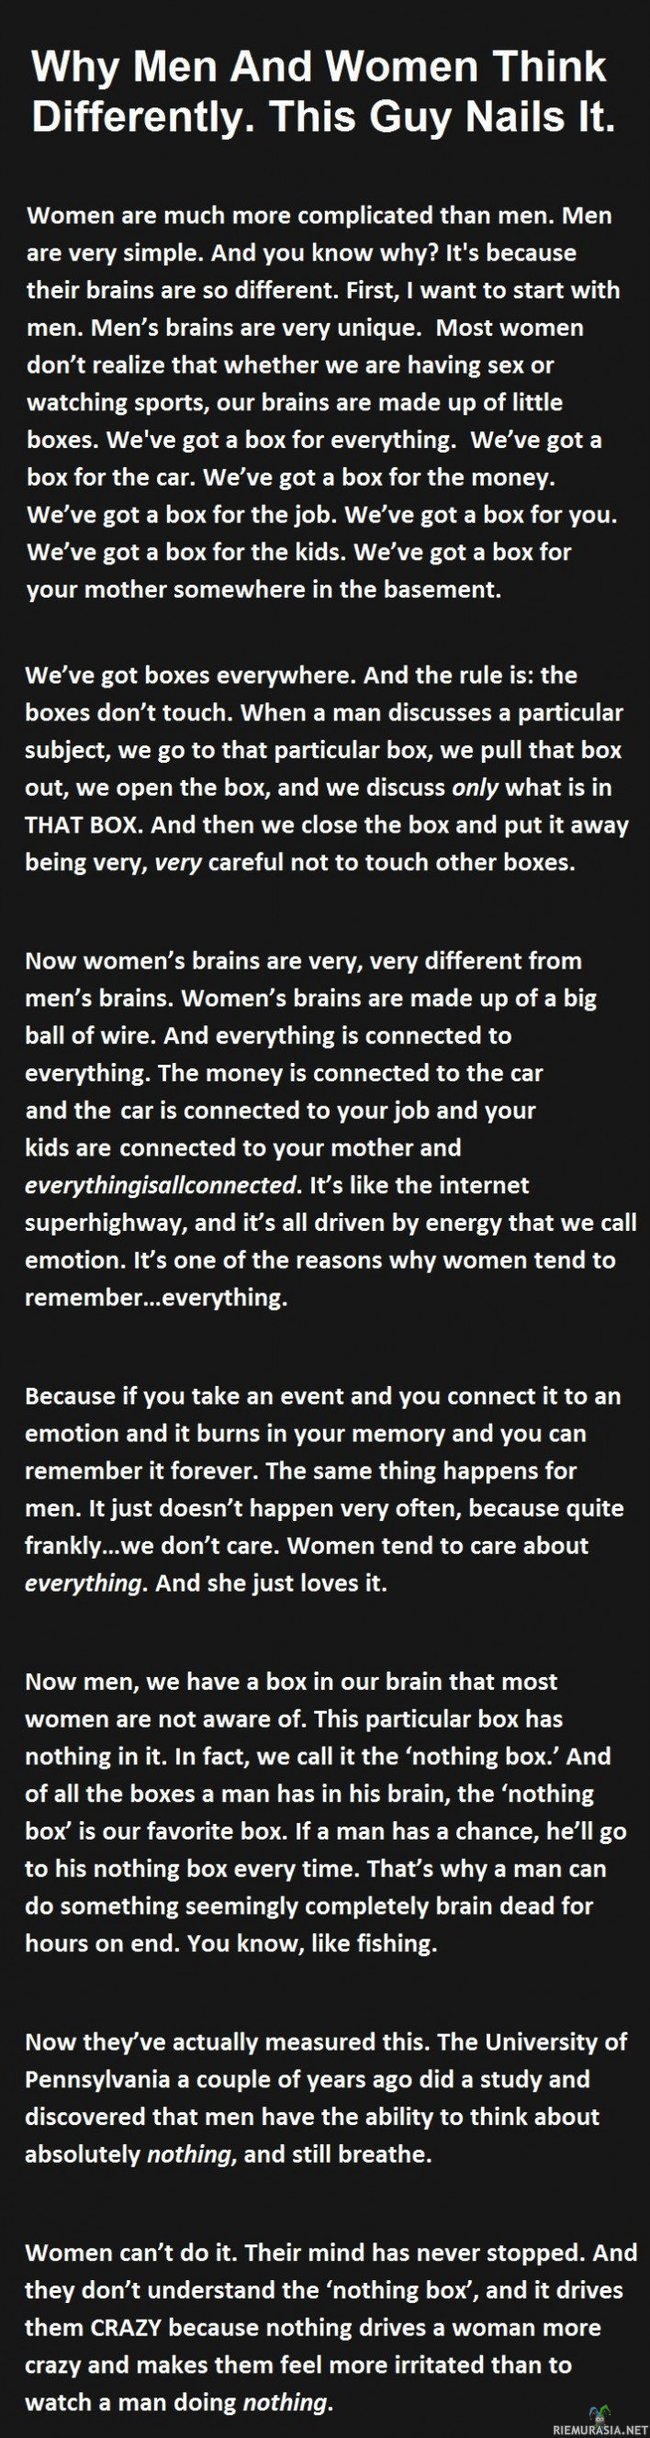 The Tale of Two Brains - Why men and women think differently